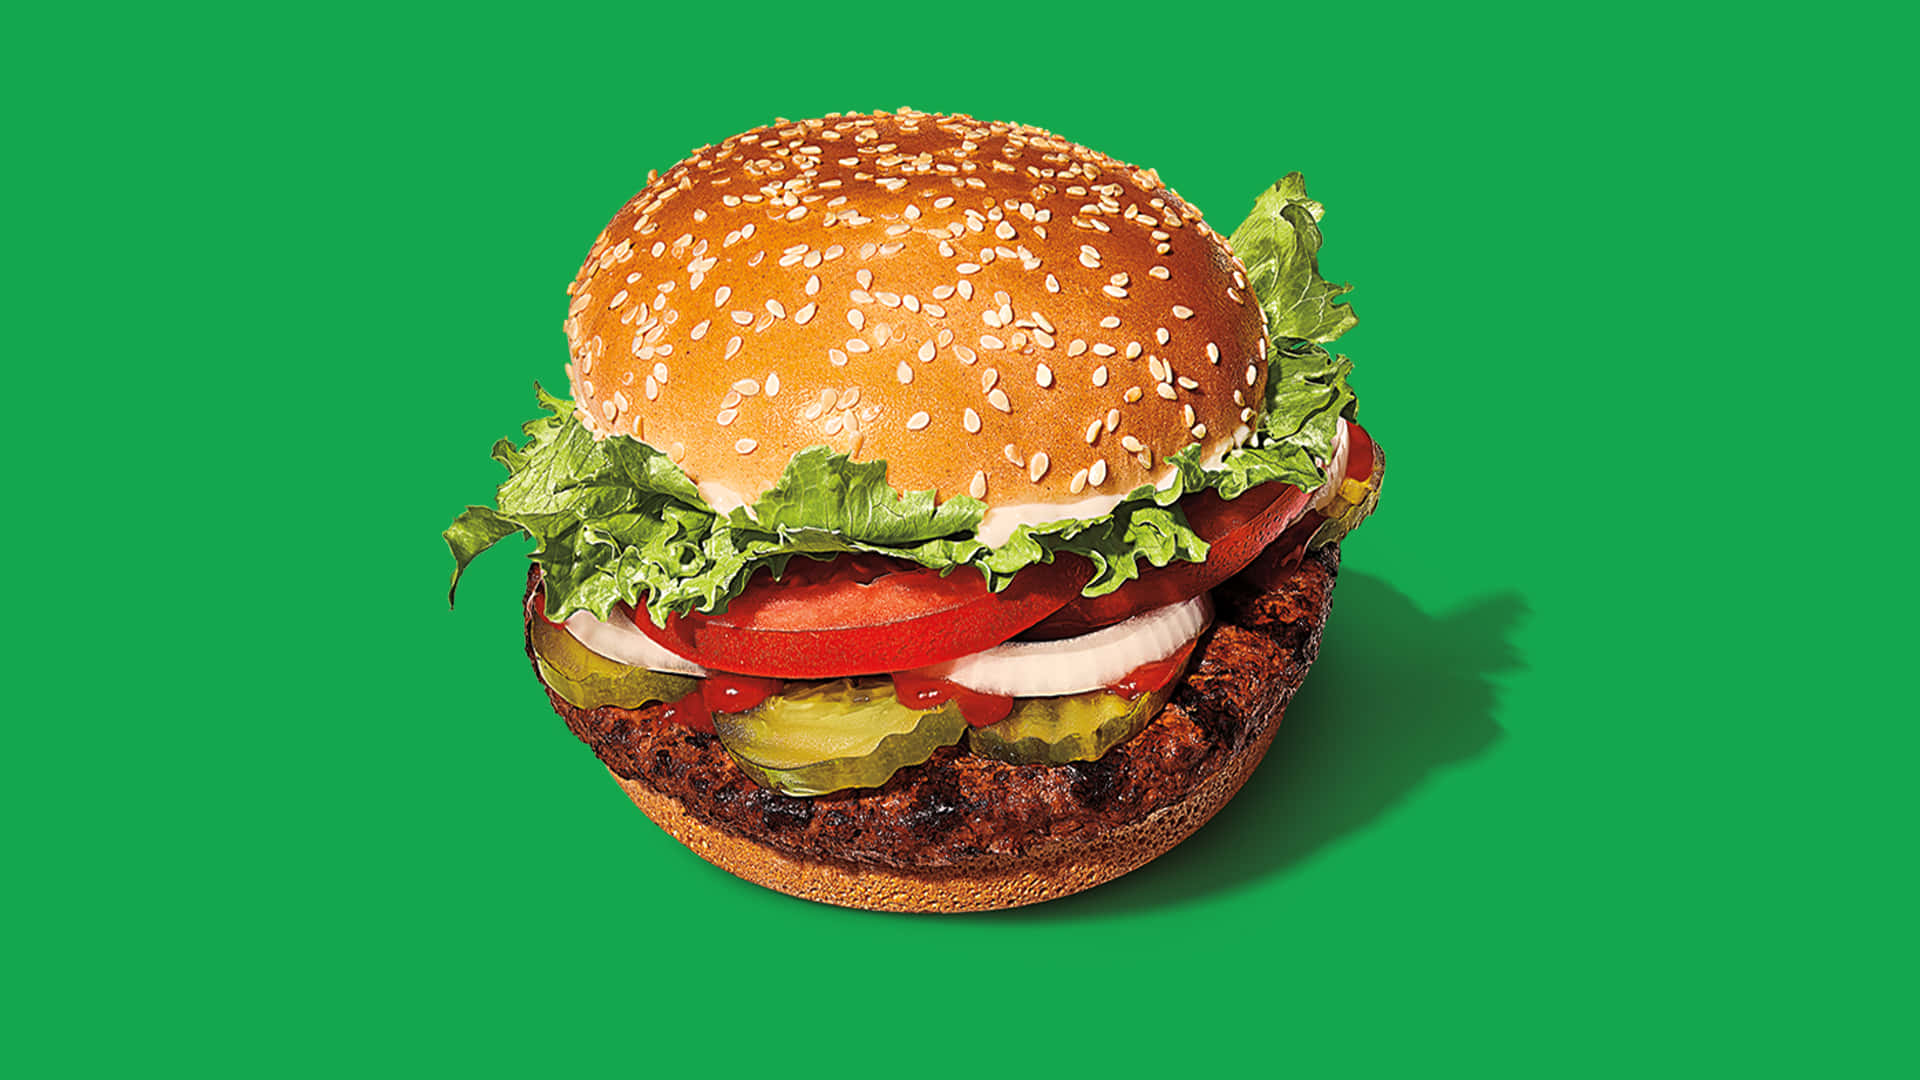 "Tempting Tastes From Burger King: Fresh Burgers, Sandwiches and Salads"